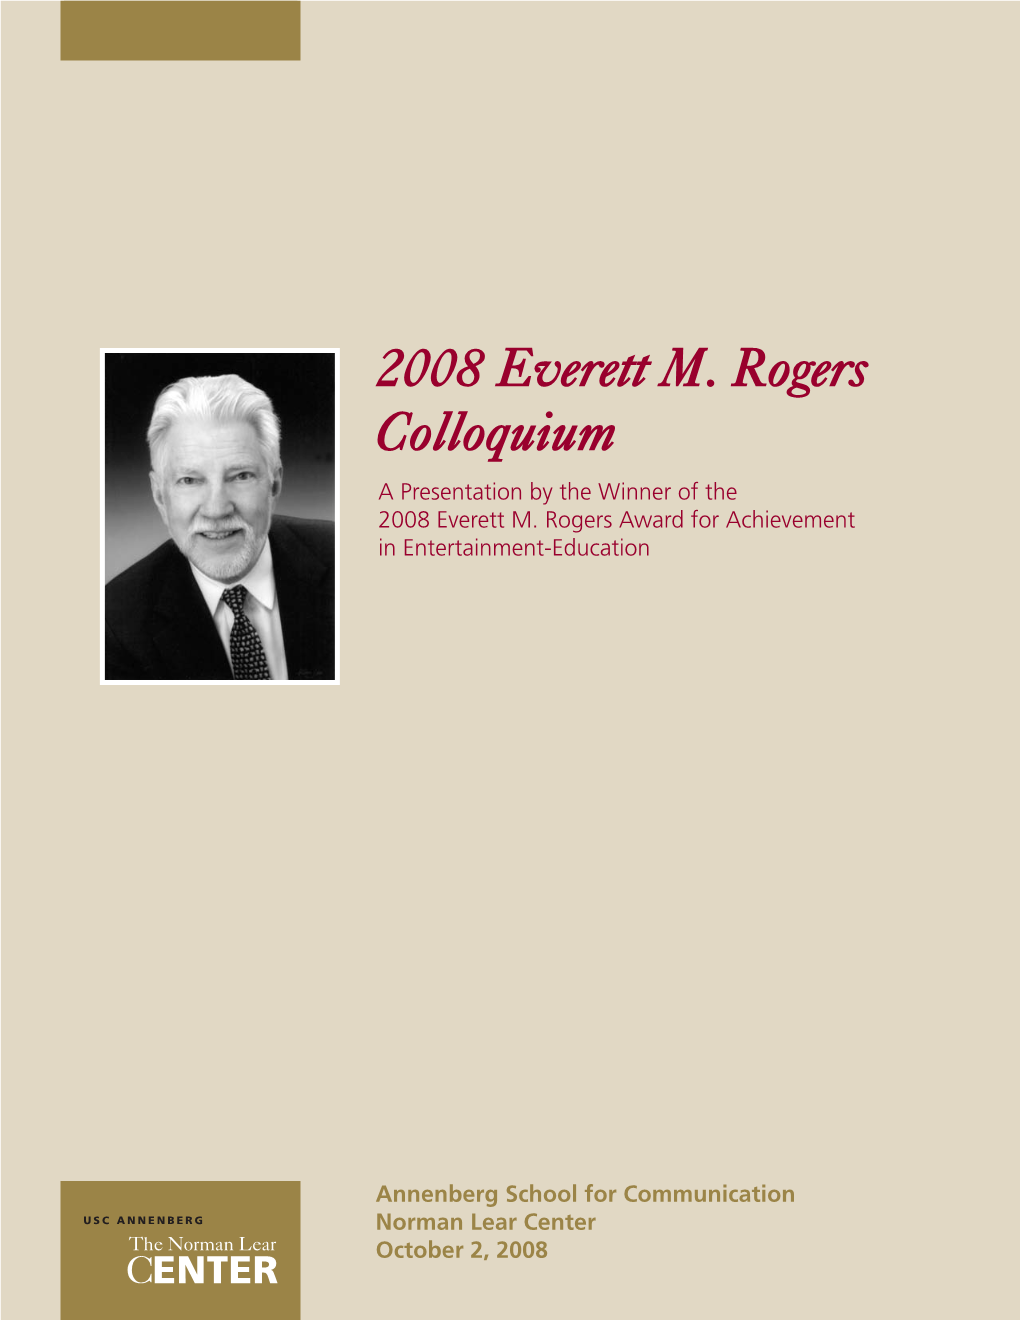 2008 Everett M. Rogers Colloquium a Presentation by the Winner of the 2008 Everett M